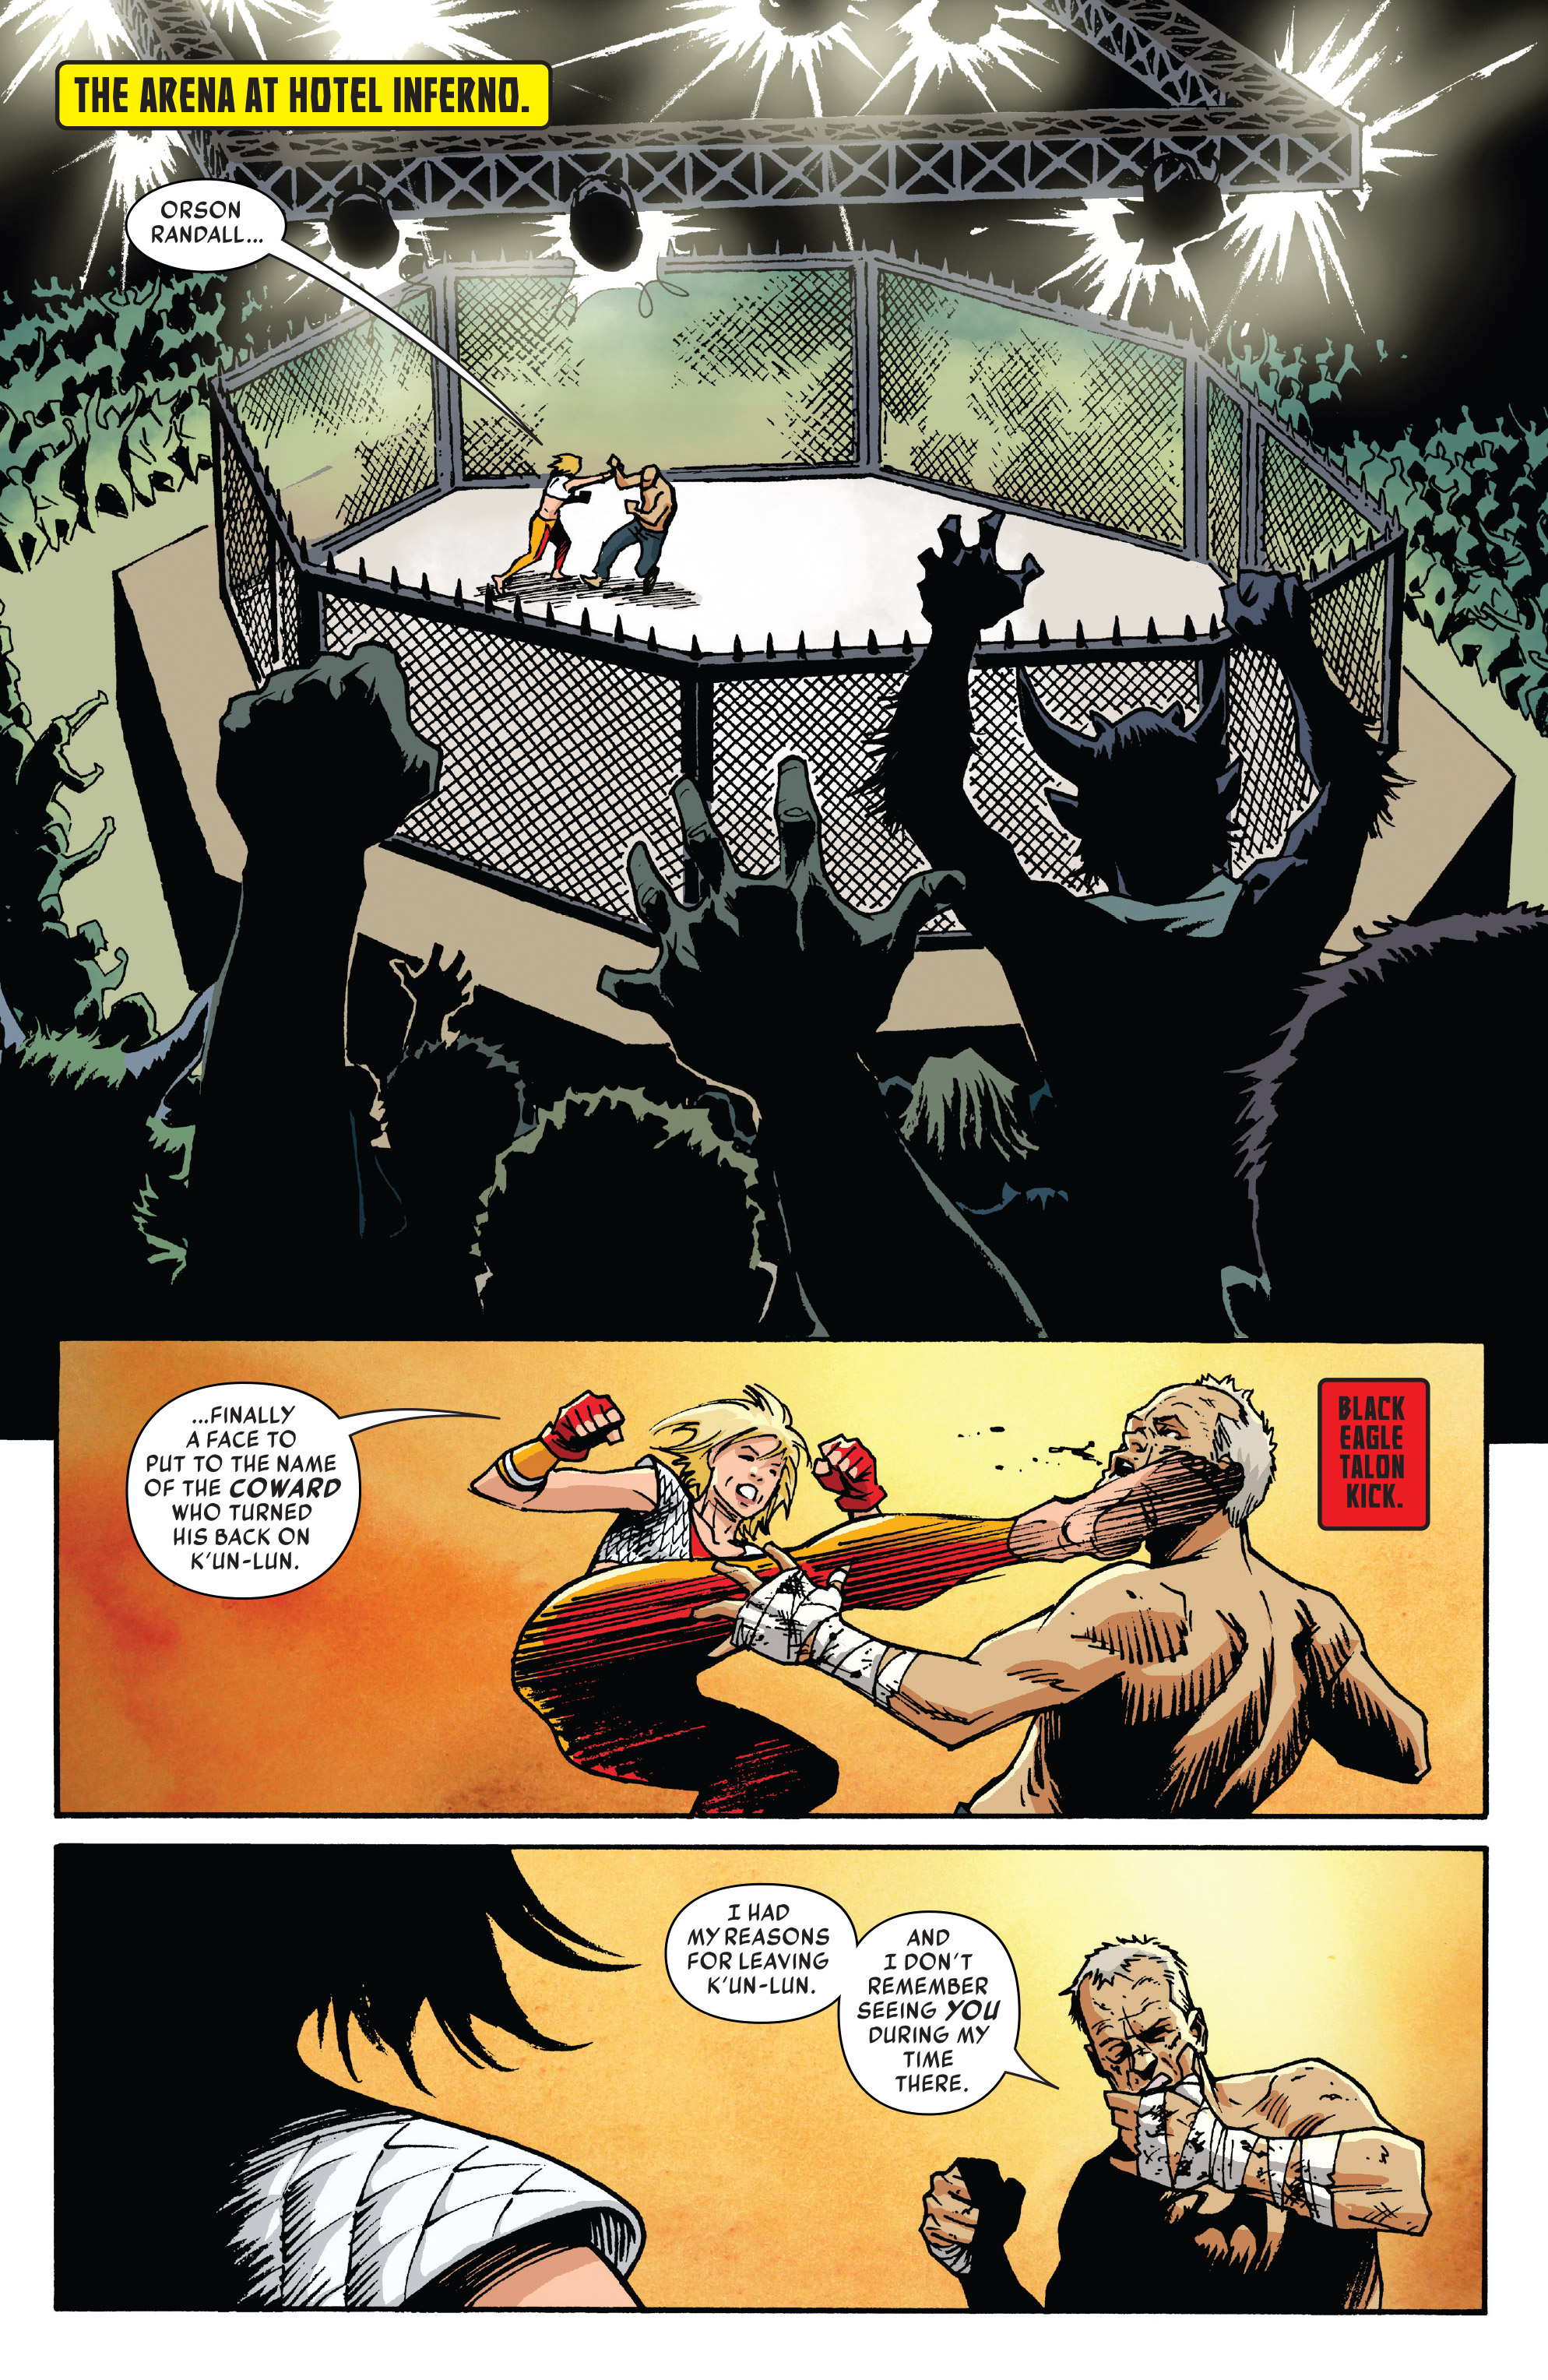 Iron Fist (2017-): Chapter 80 - Page 3